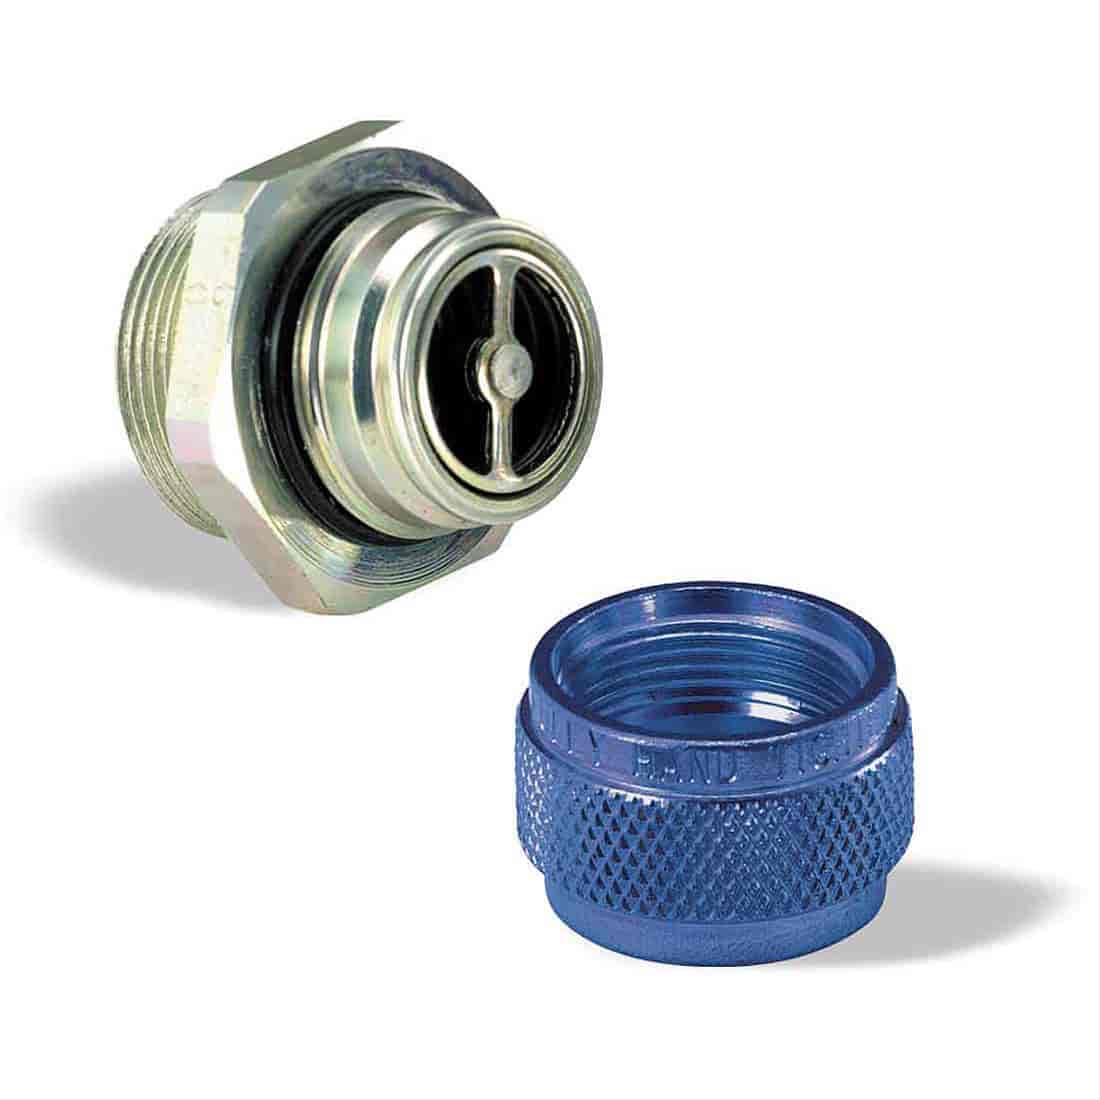 Male Half M12 x 1.5 Thread Size 1.52in.x.96in. 1-1/16in. Hex Size - Quick-Drain Oil Pan Coupling